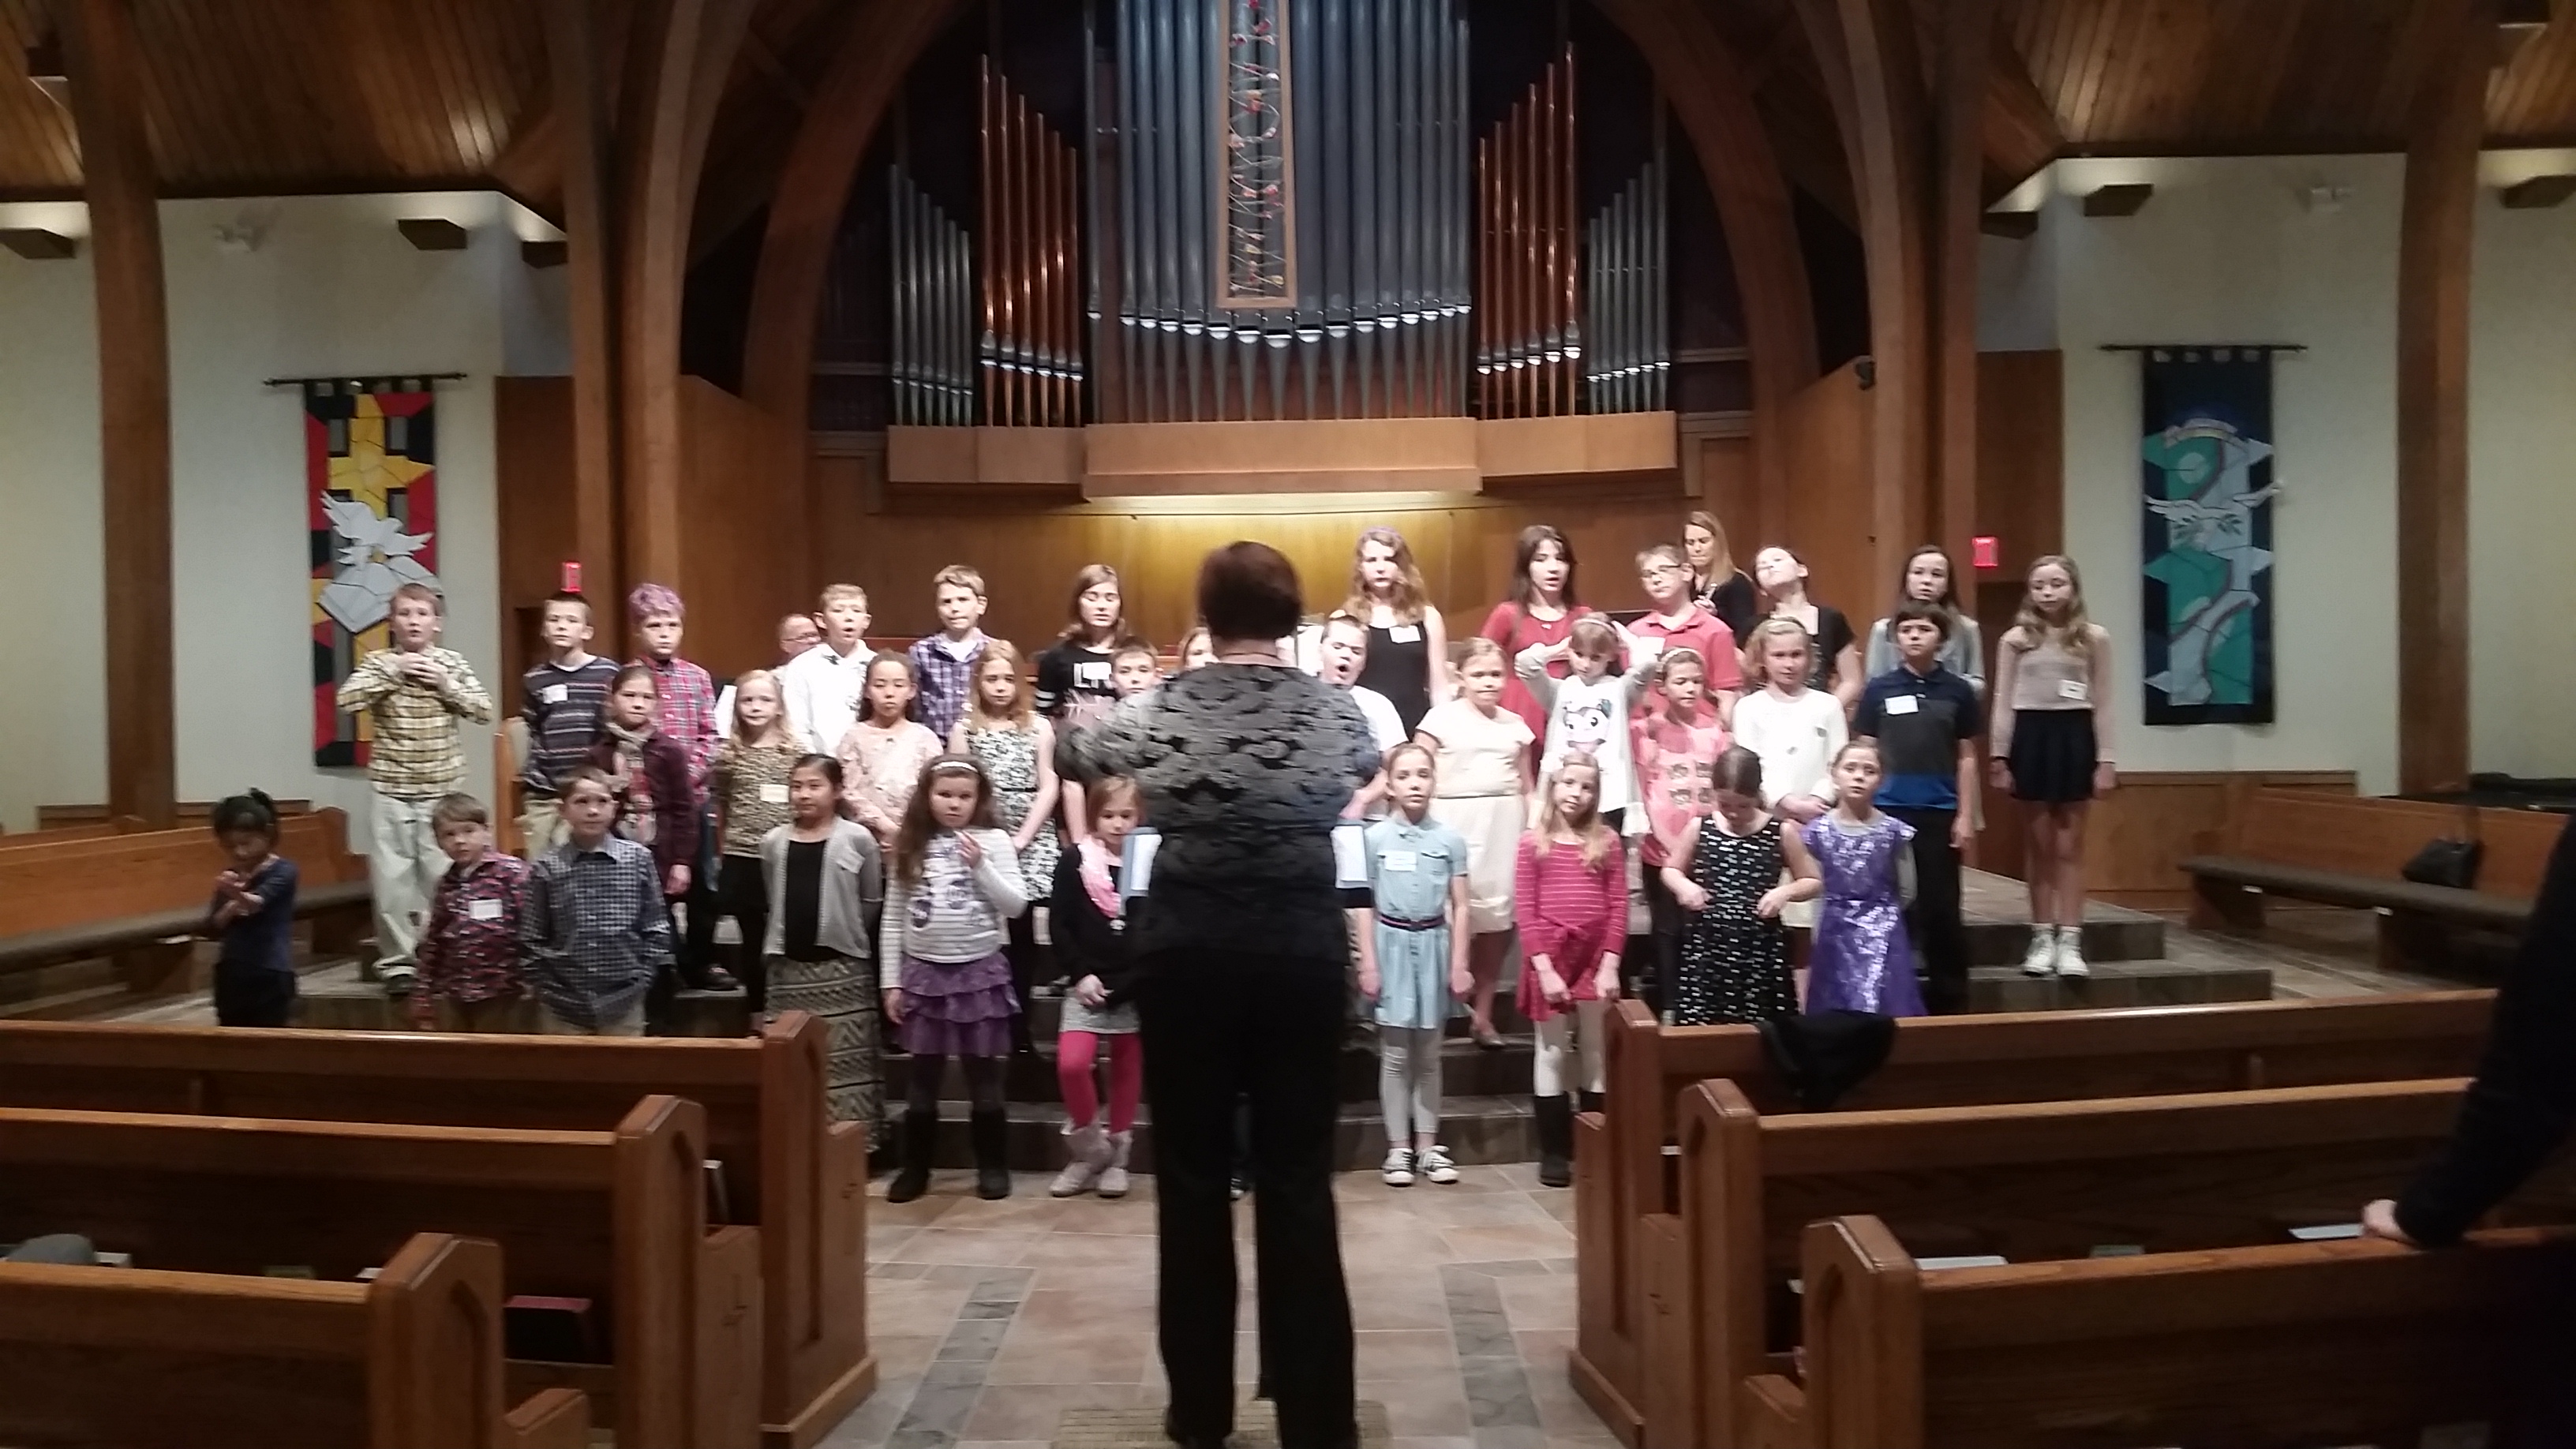 Kansas City Chapter of the Choristers Guild